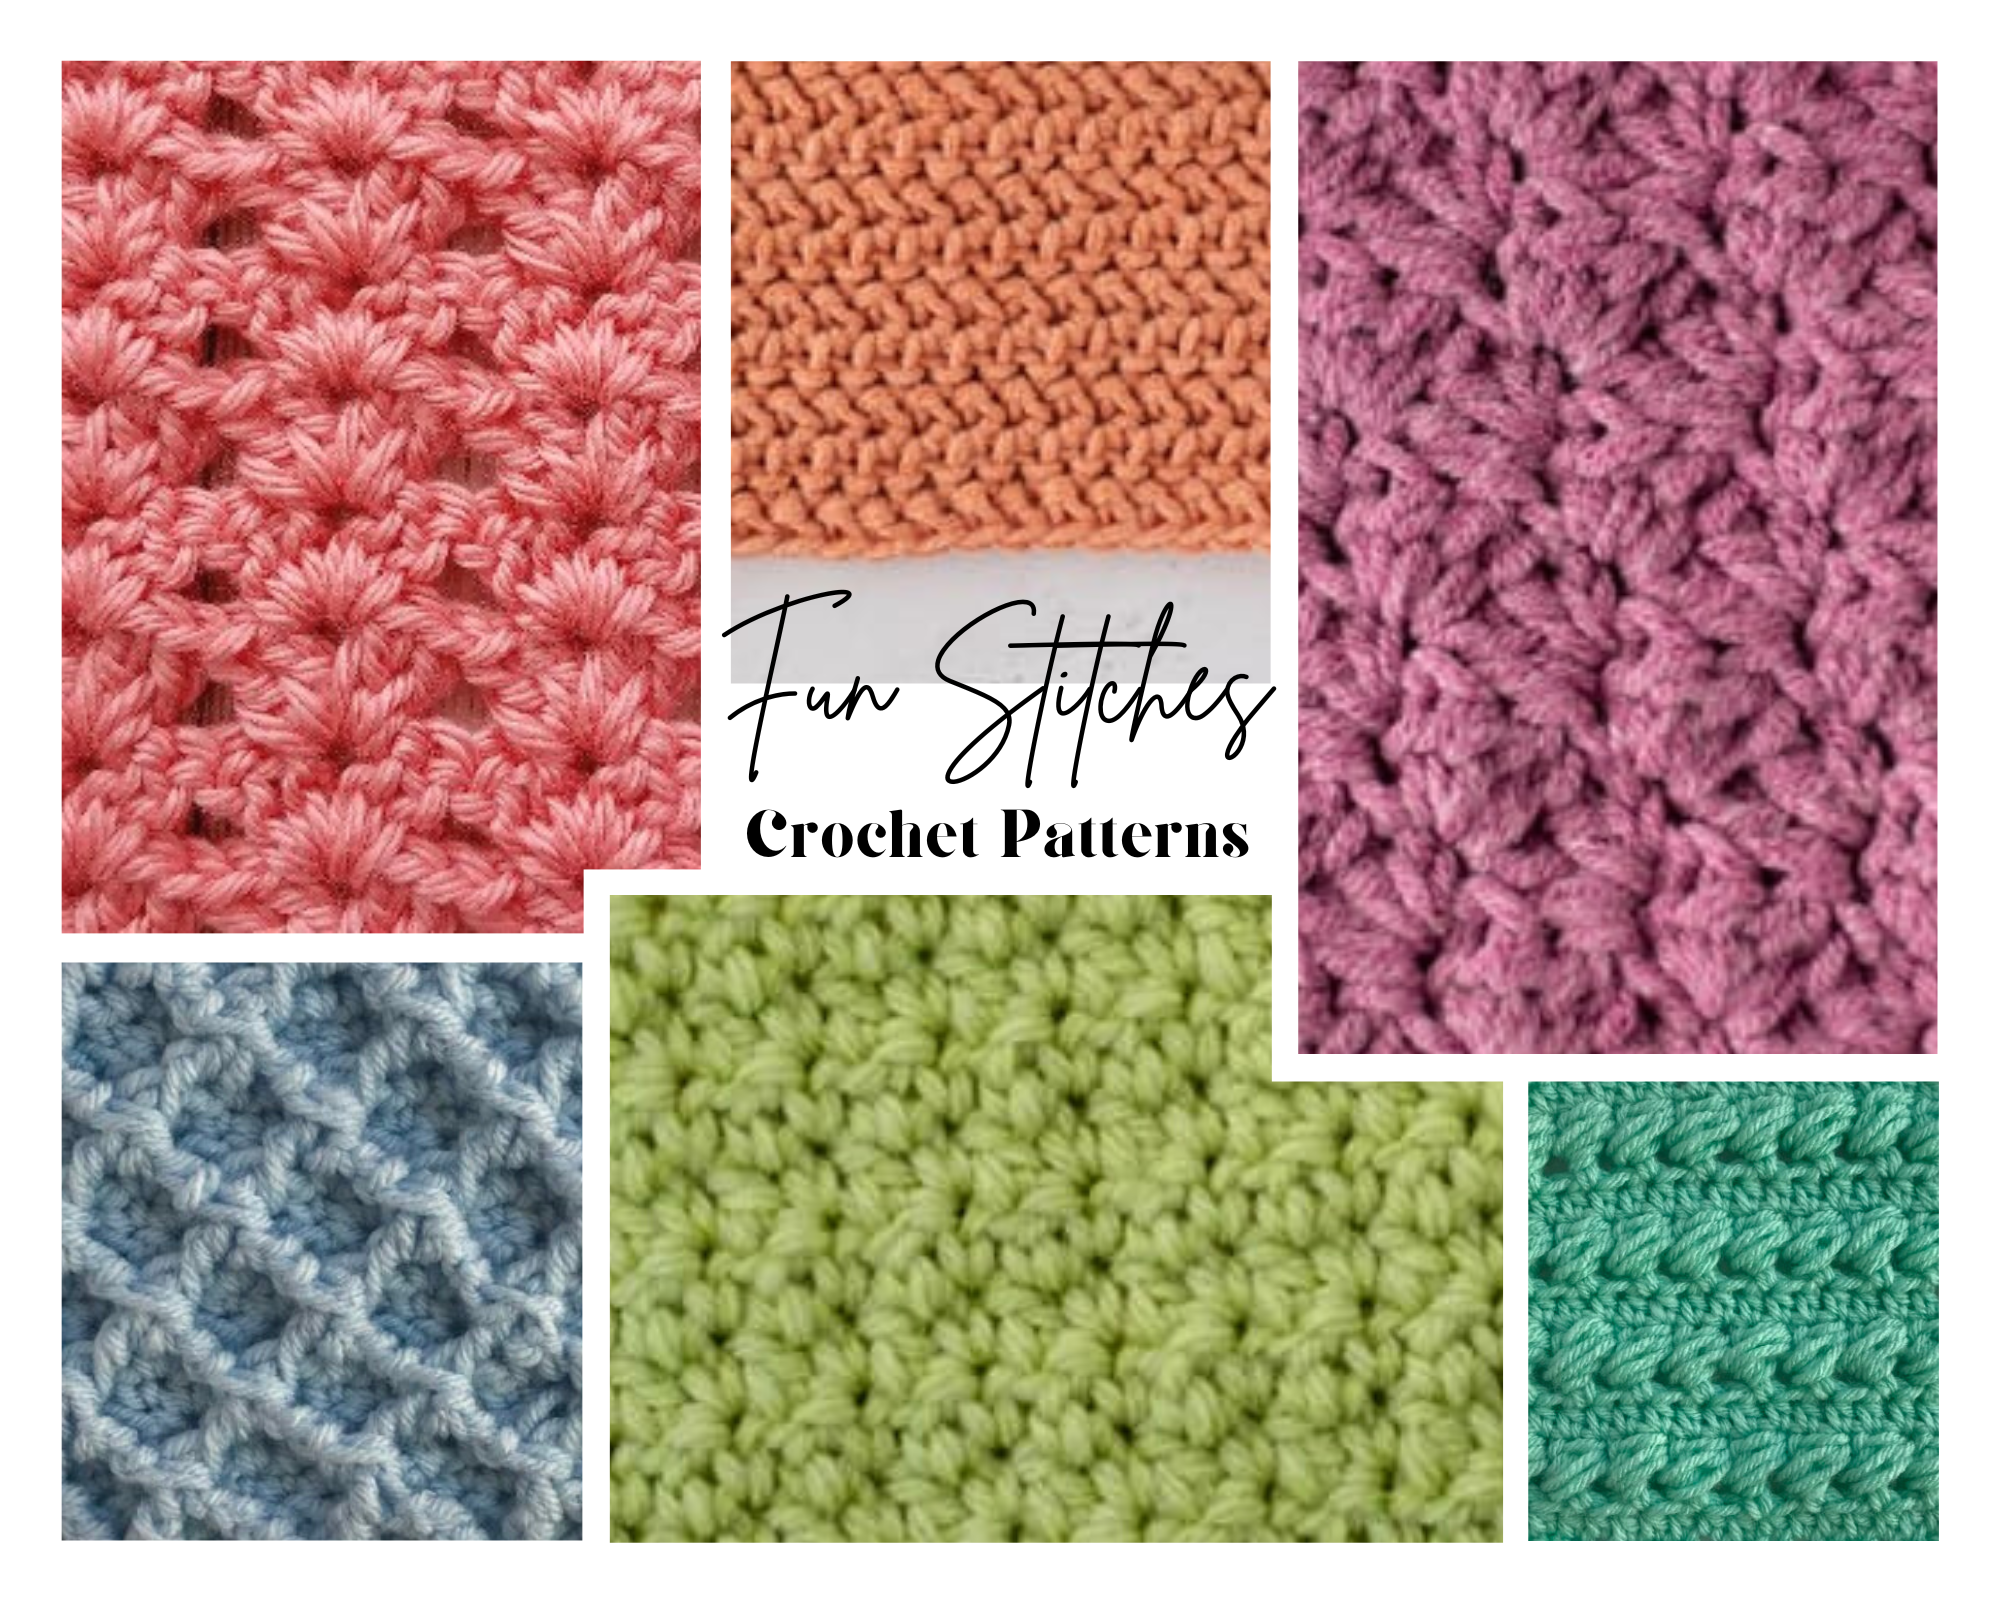 5 Prettiest Crochet Stitches to Use for Baby Blankets - Jewels and Jones